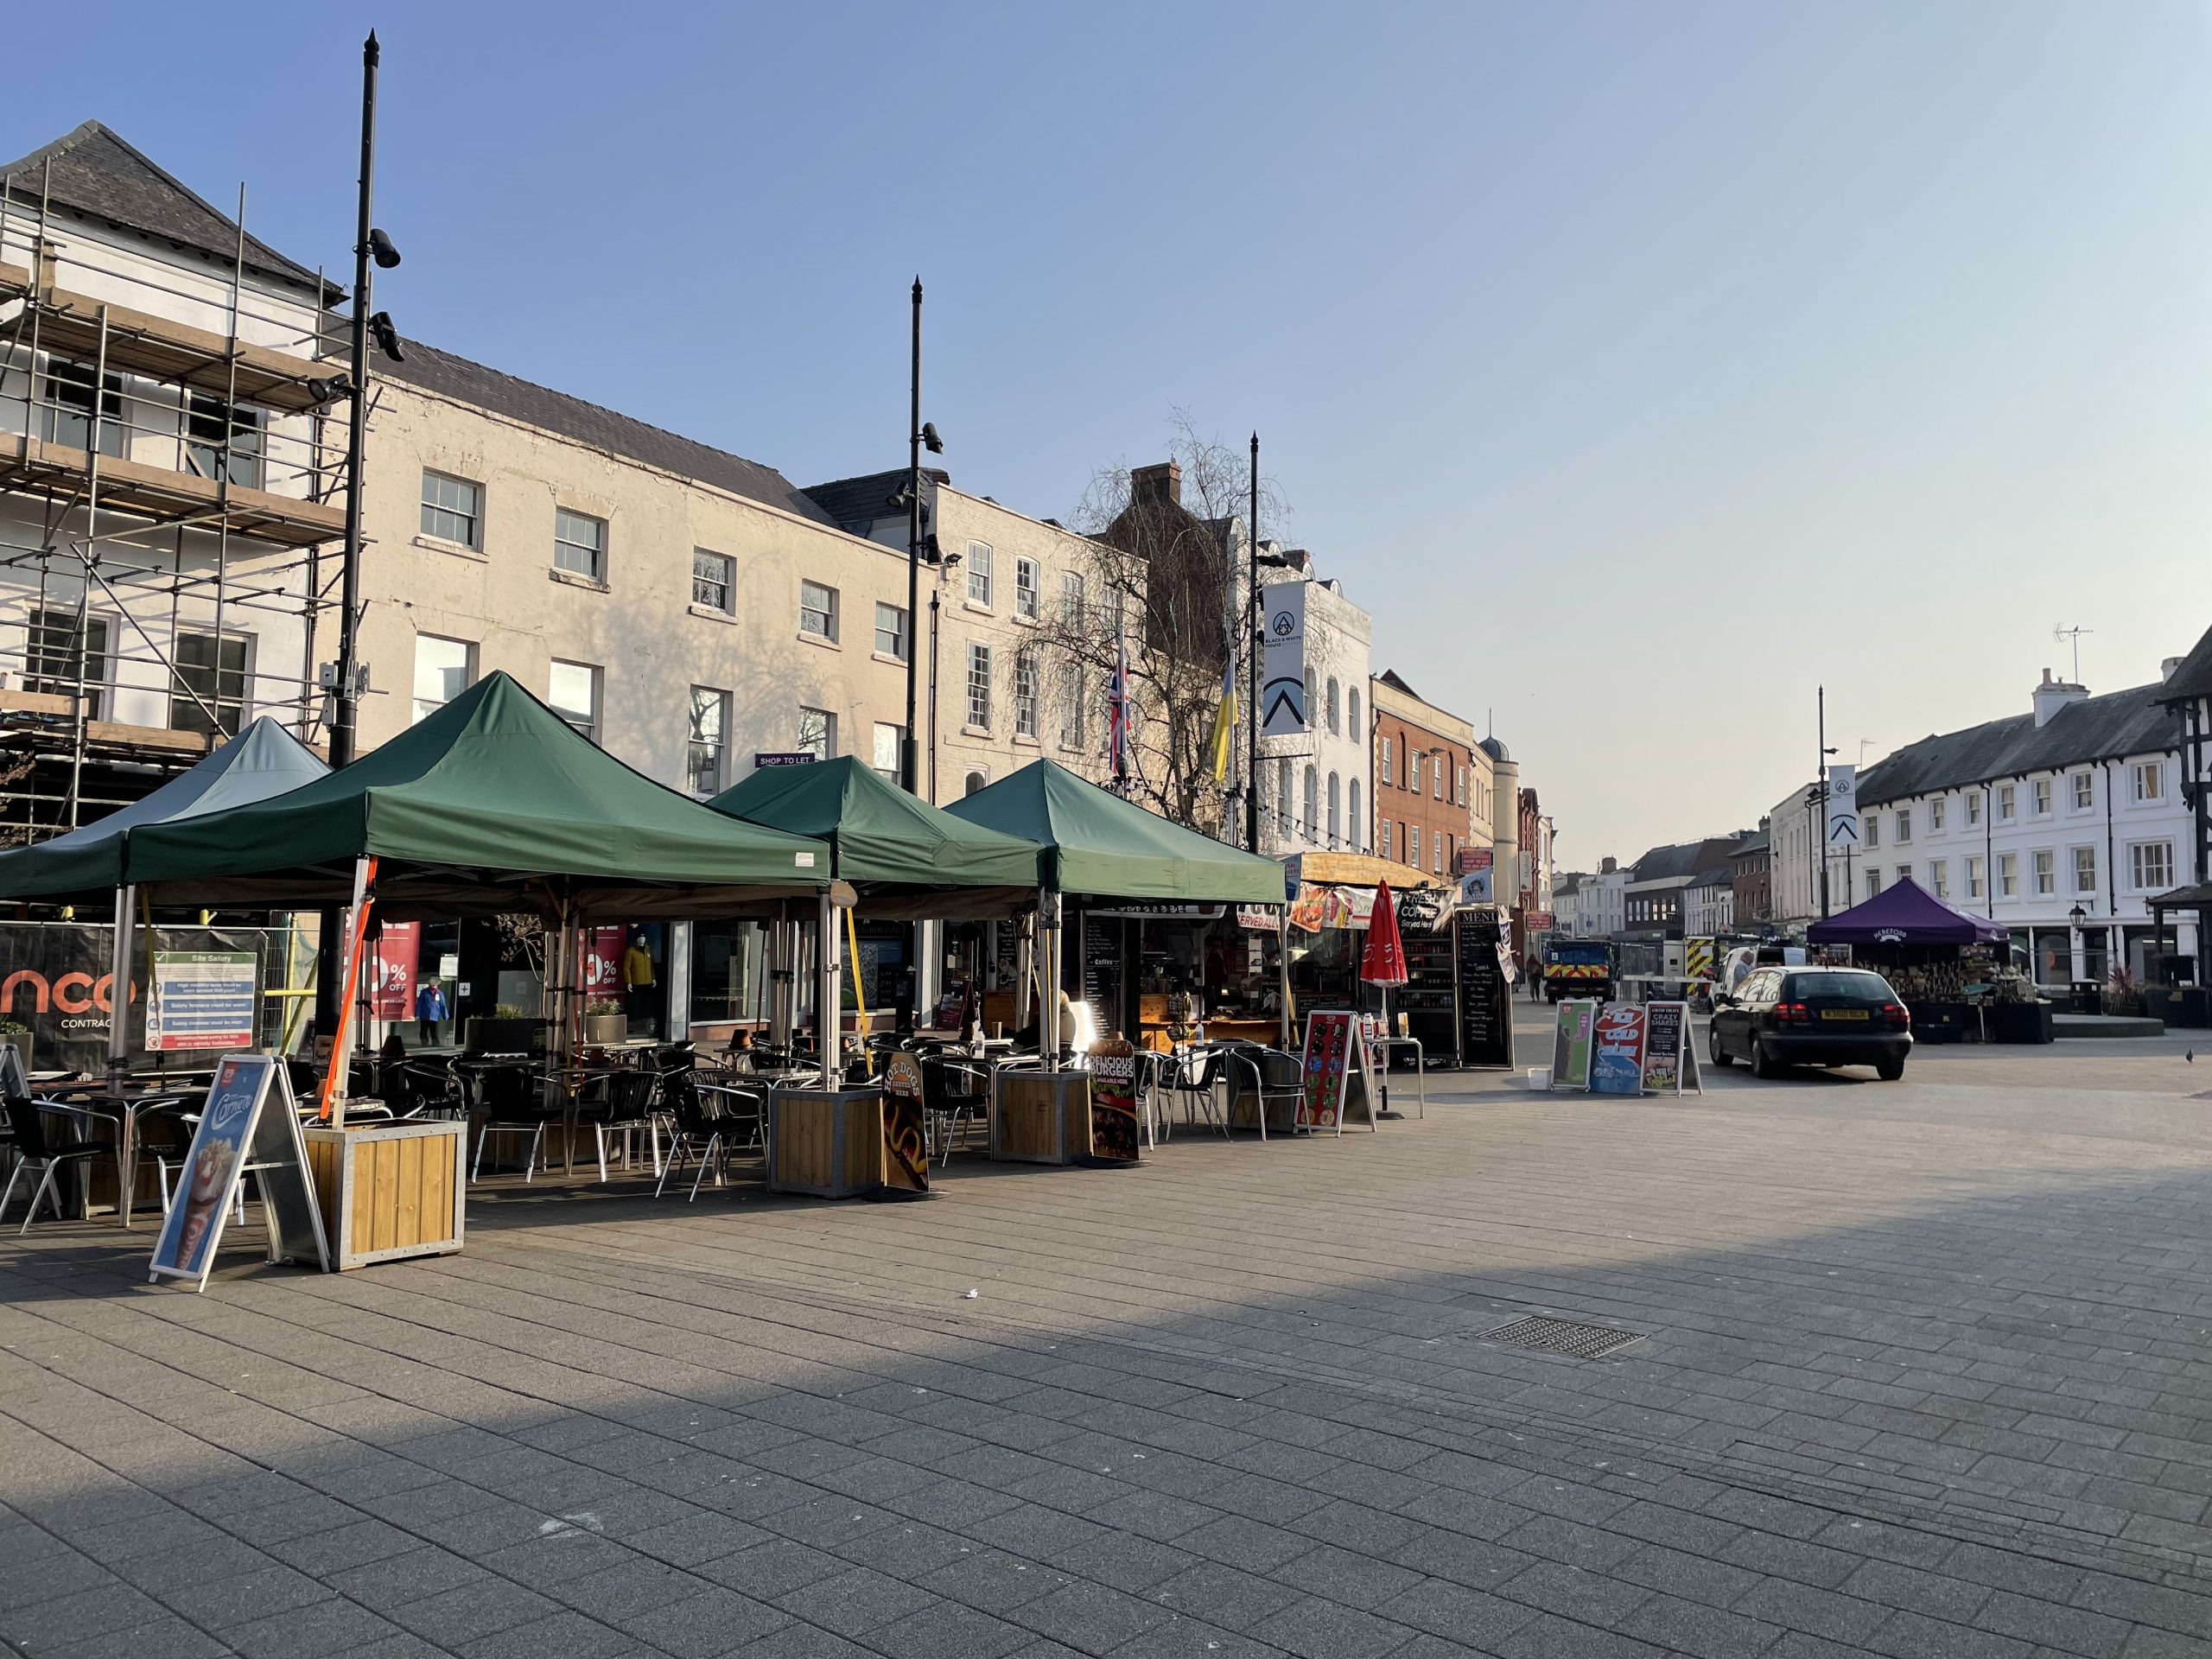 NEWS | Management costs of Hereford City Centre Improvements project expected to be around £580,000